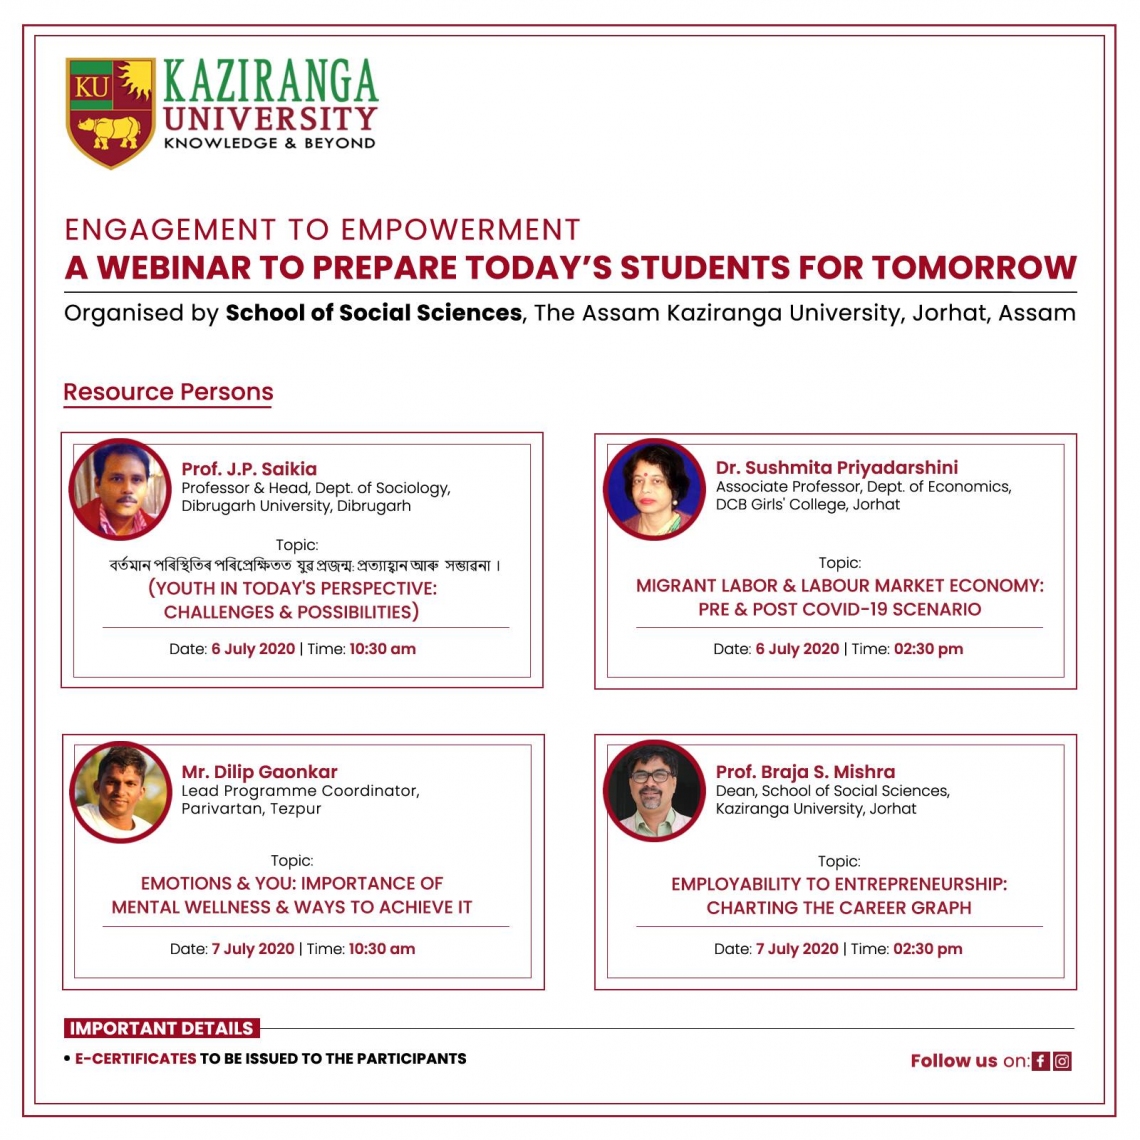 Webinar on Engagement to Empowerment: A Webinar to Prepare Today's Students for Tomorrow on the 6th &amp; 7th of July 2020.